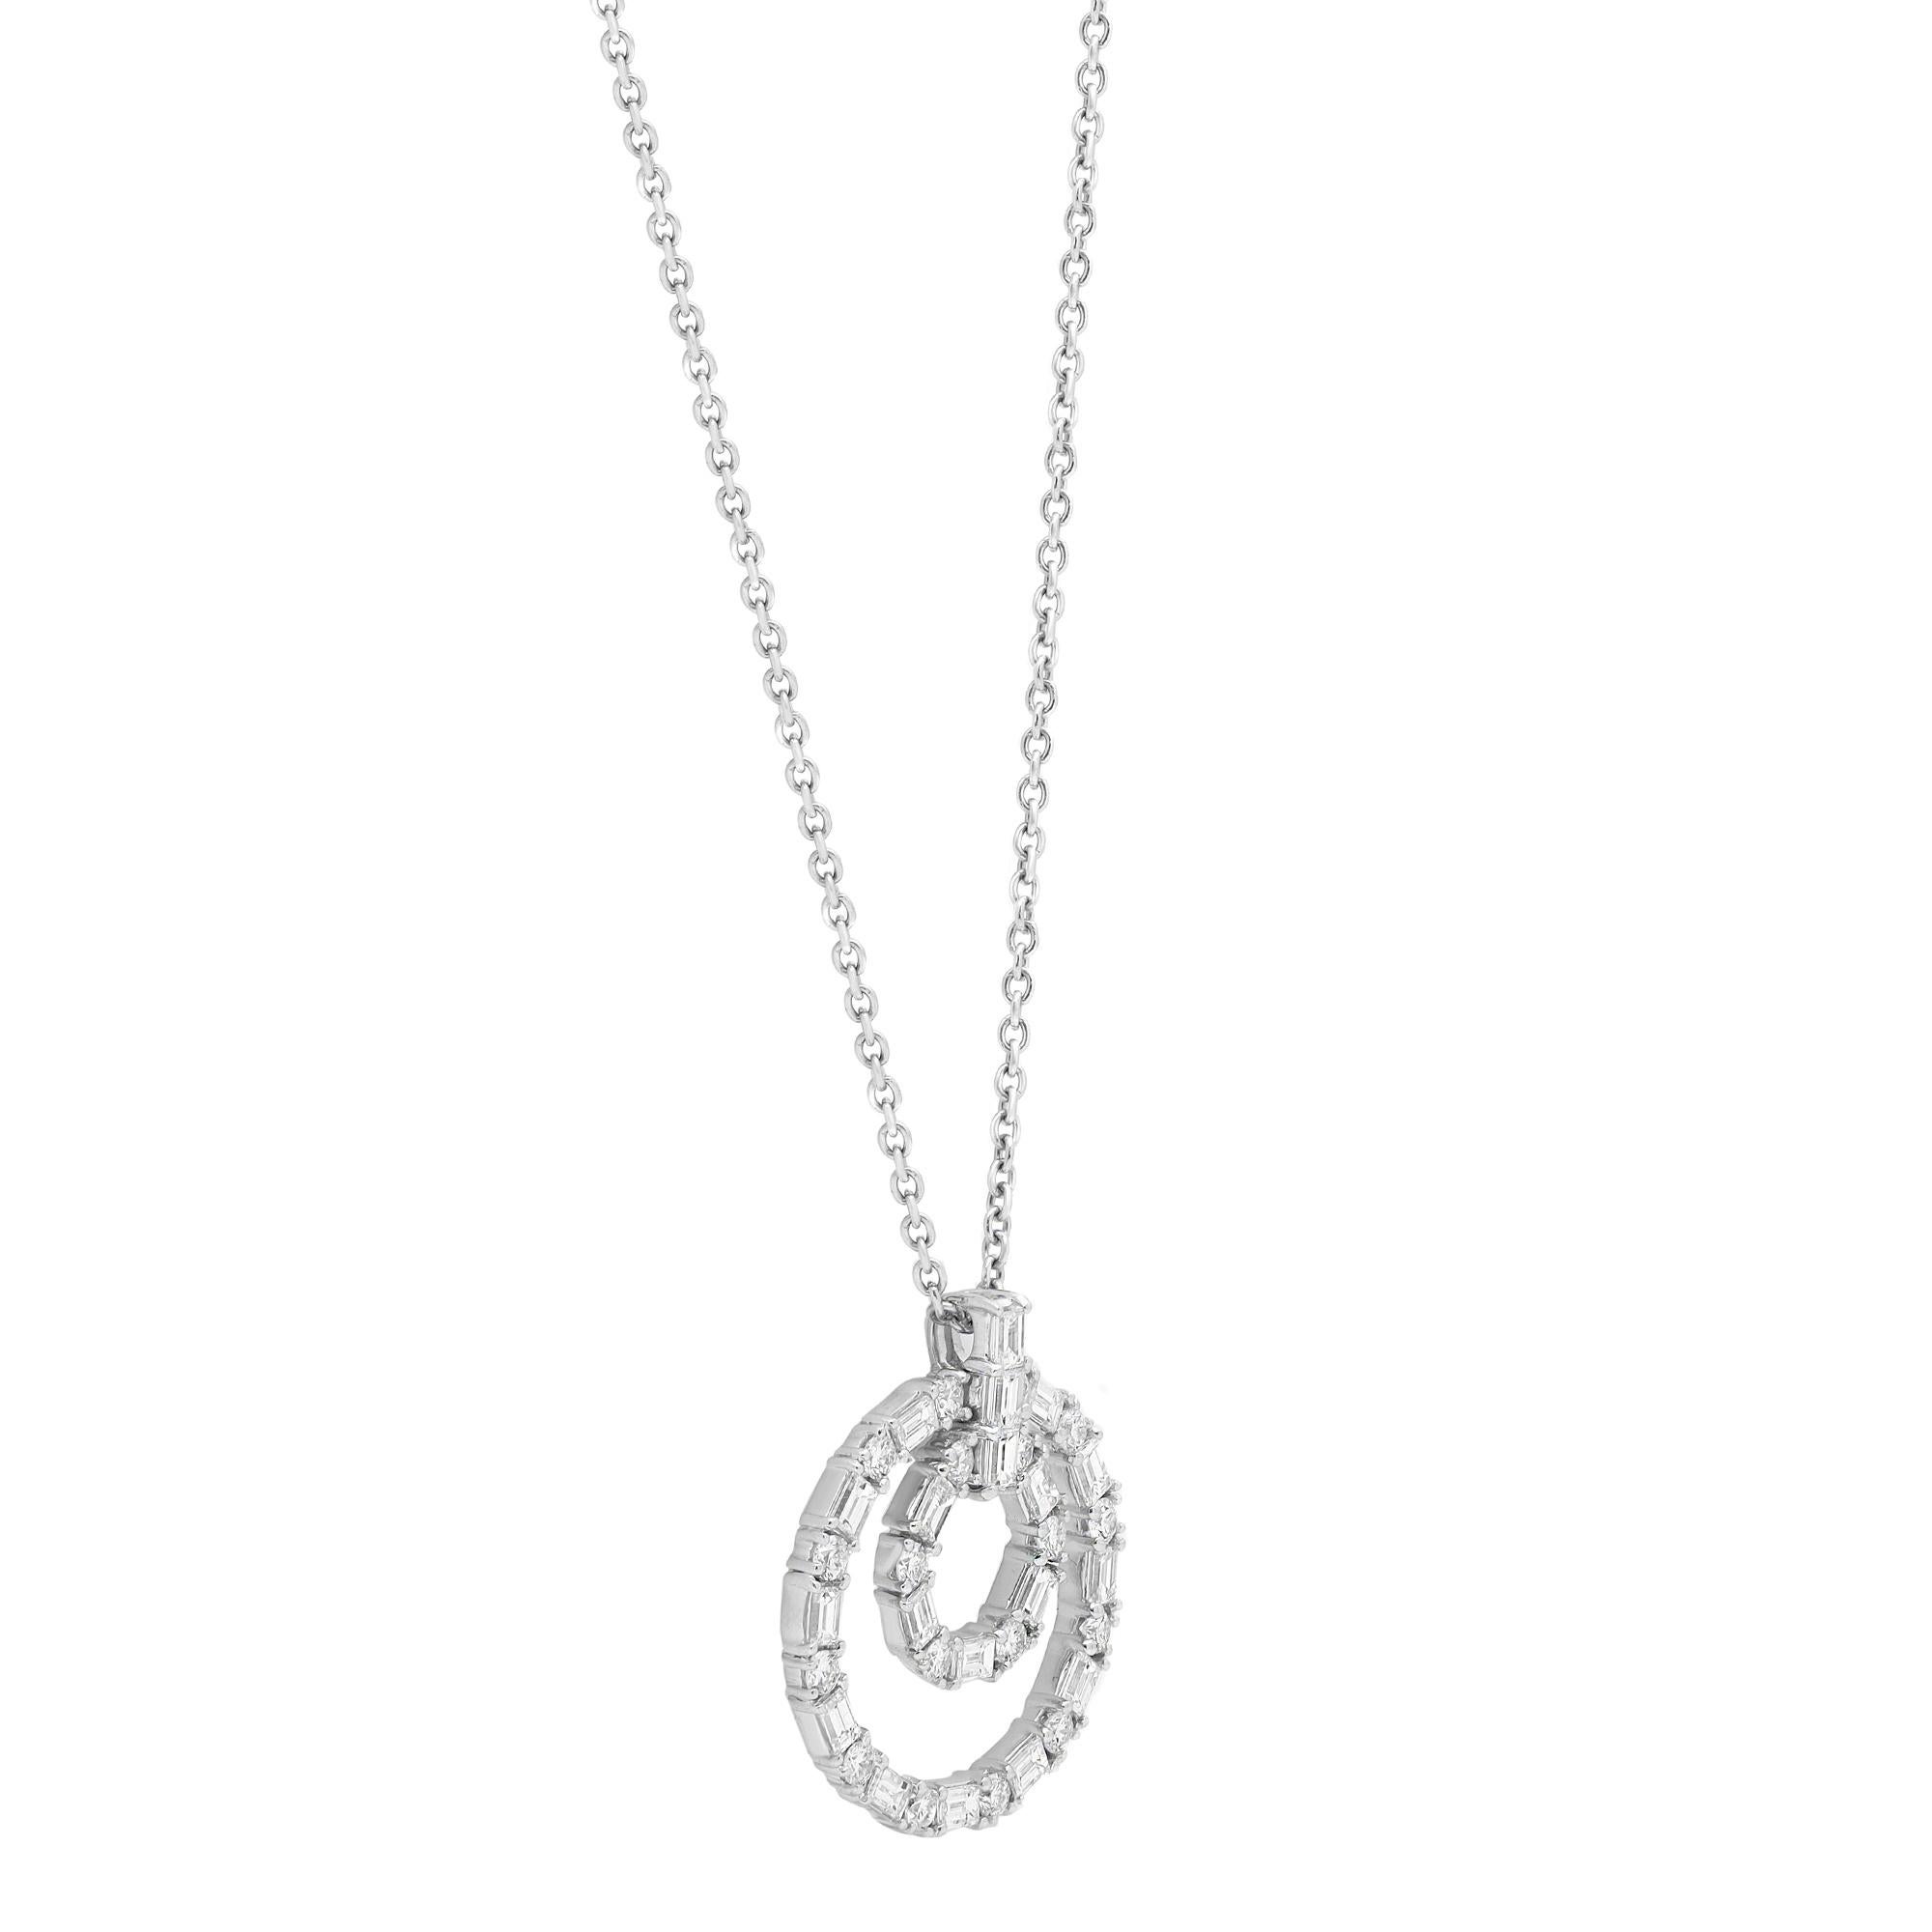 Modern 1.70cttw Baguette & Round Diamond Double Ring Pendant Necklace 18K White Gold For Sale